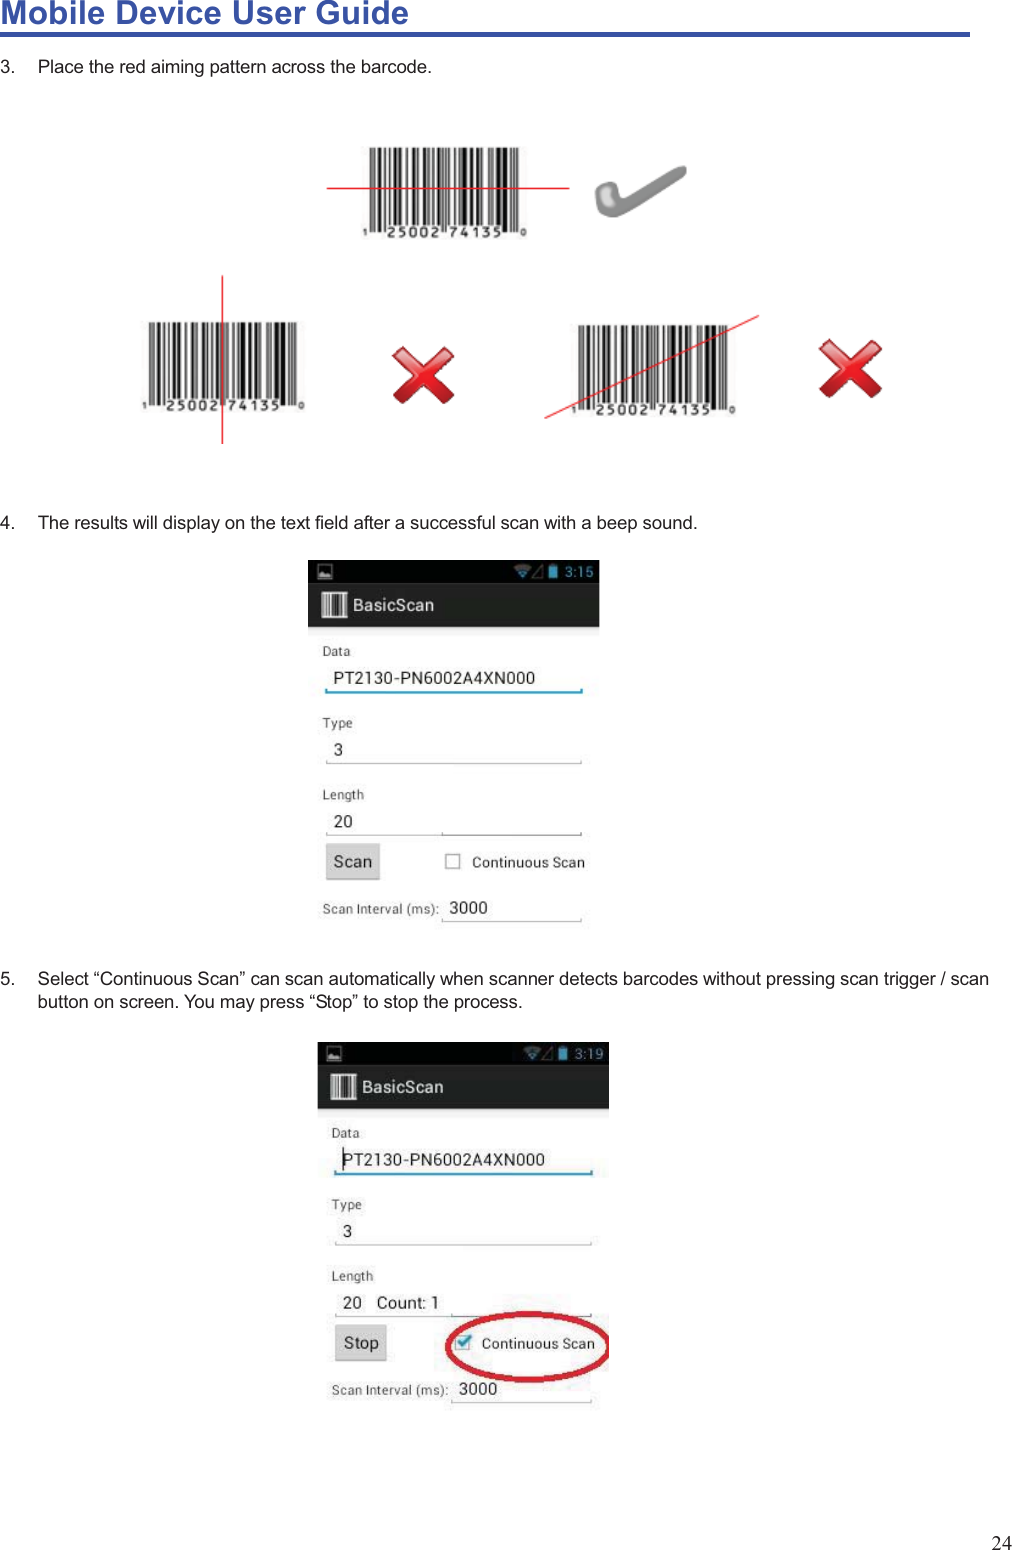 Mobile Device User Guide                                                                                                                                                                                                                                                                                                                                                                                                                                                                                                                                             24 3.  Place the red aiming pattern across the barcode.                      4.  The results will display on the text field after a successful scan with a beep sound.                    5.  Select “Continuous Scan” can scan automatically when scanner detects barcodes without pressing scan trigger / scan button on screen. You may press “Stop” to stop the process.                 